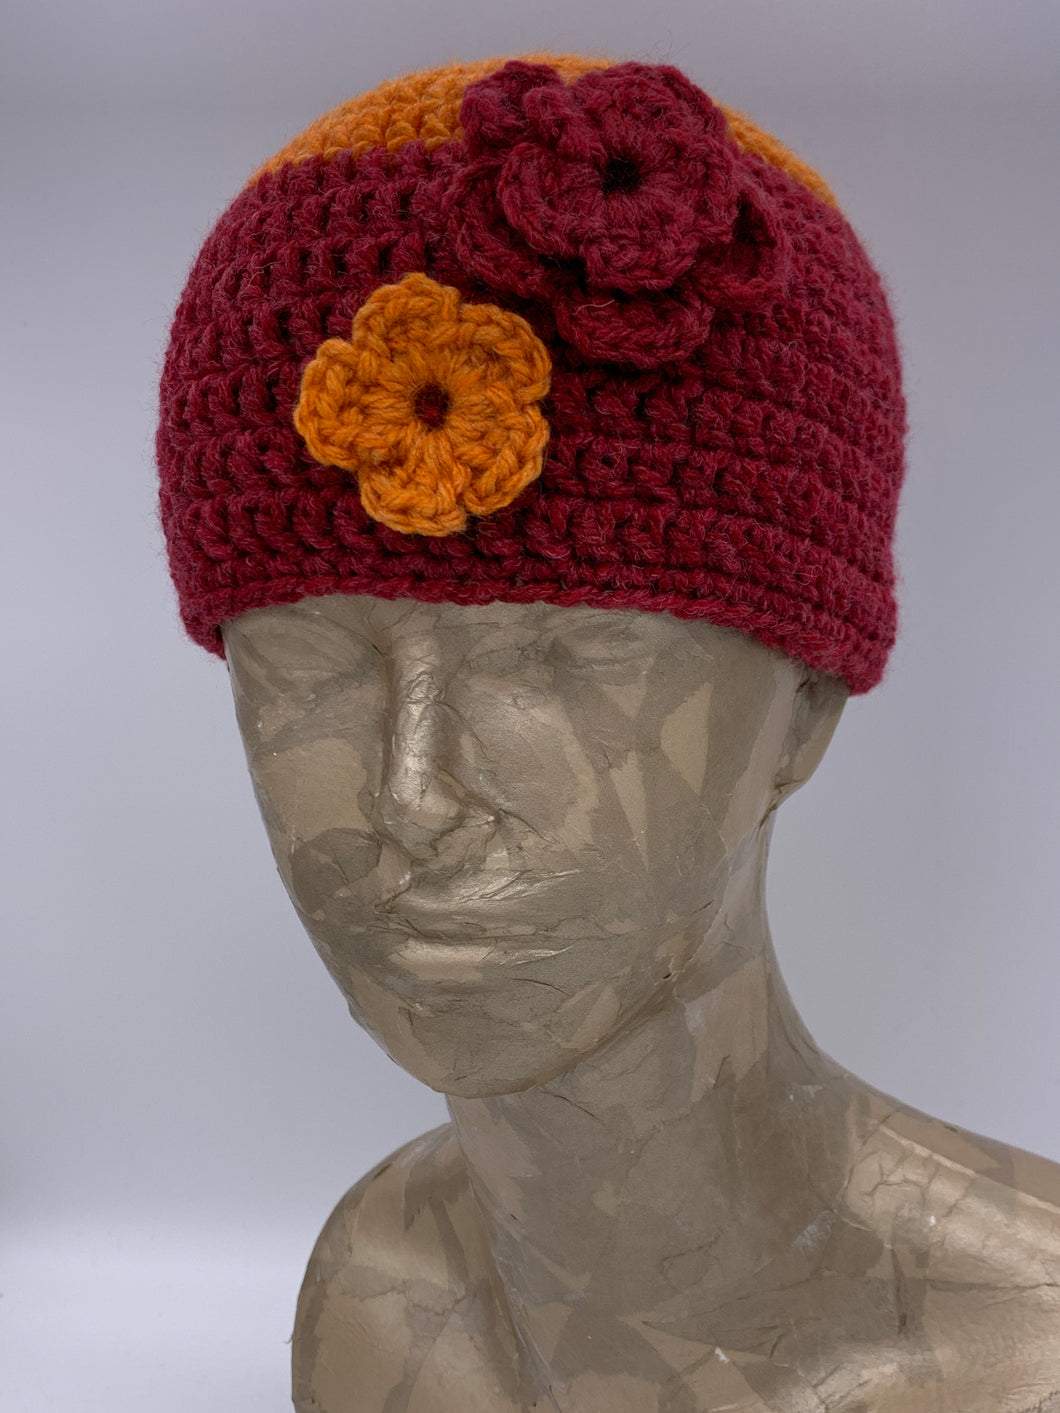 Crochet two tone crimson and orange beanie hat with flower detail- Size Toddler 1-3 yrs